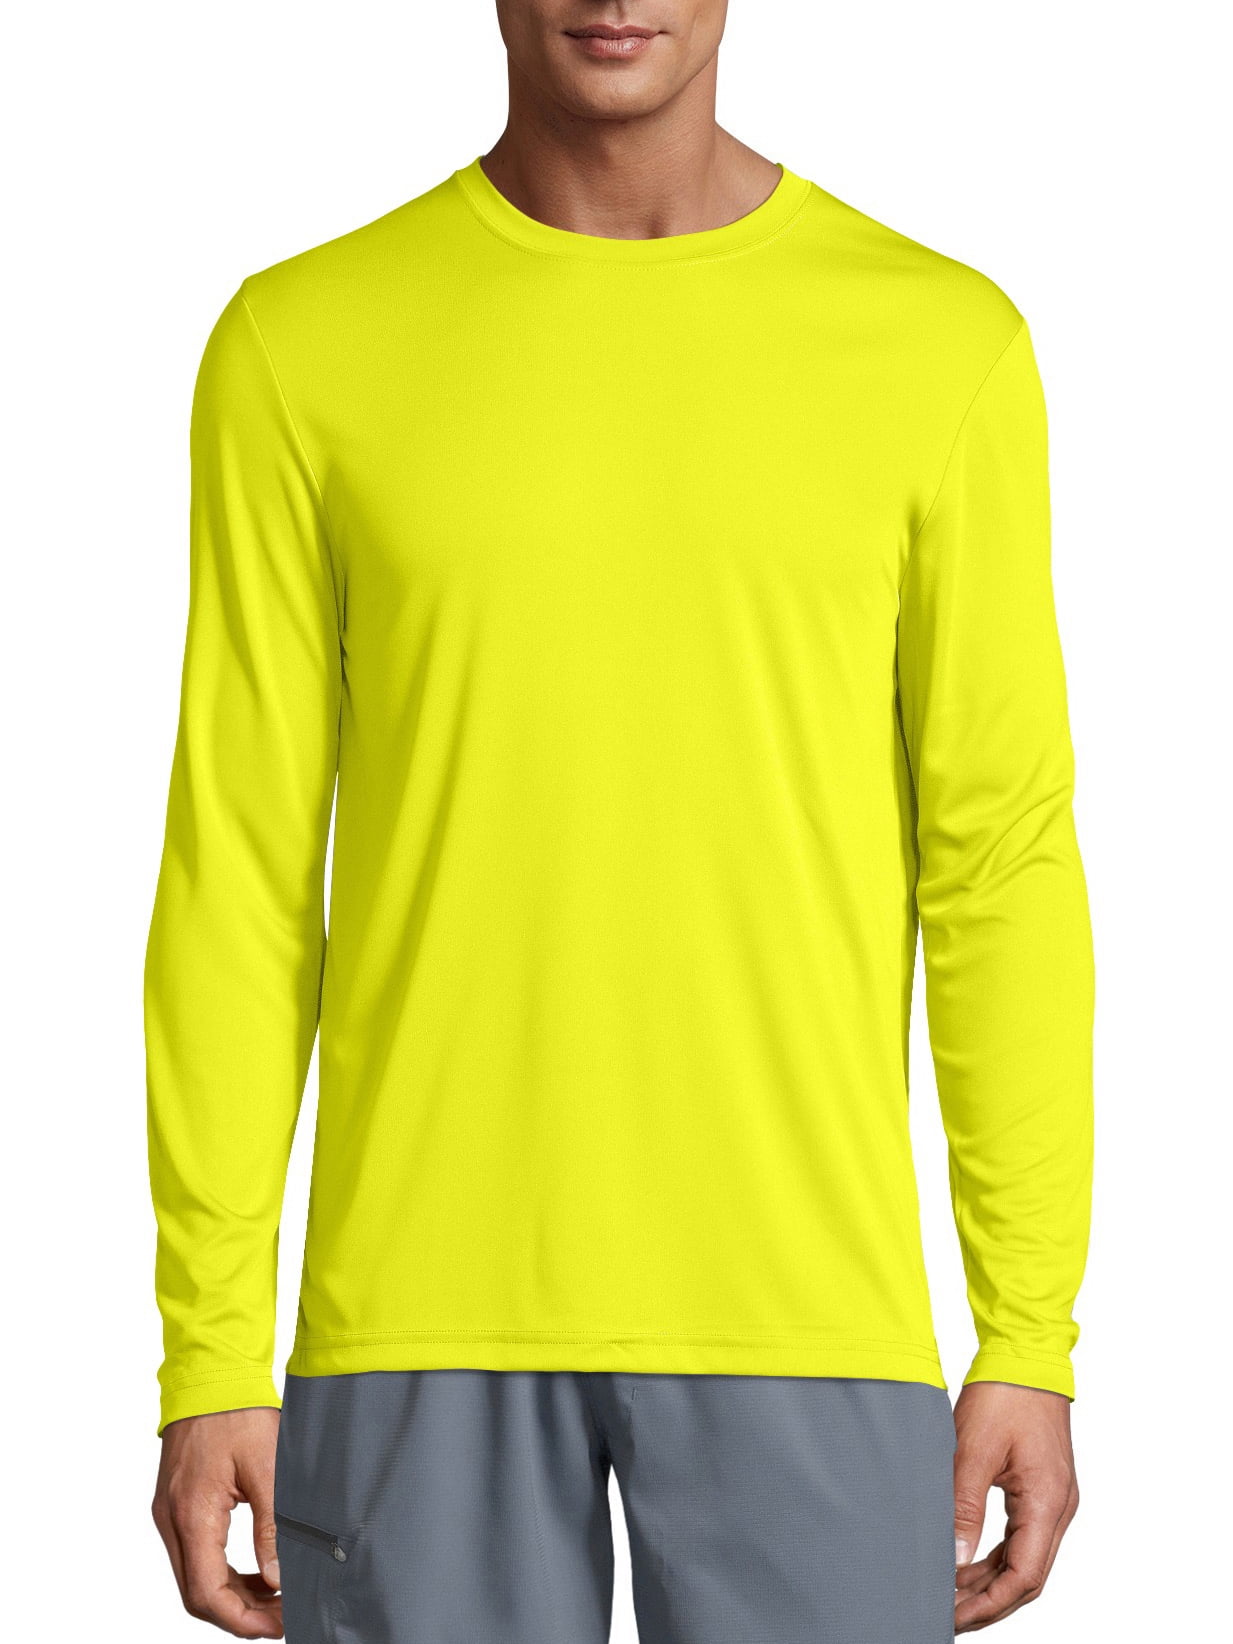 Details about   Mens Compression Shirt Sport Long Sleeve Tight fit Top Wicking Cool Dry Moisture 